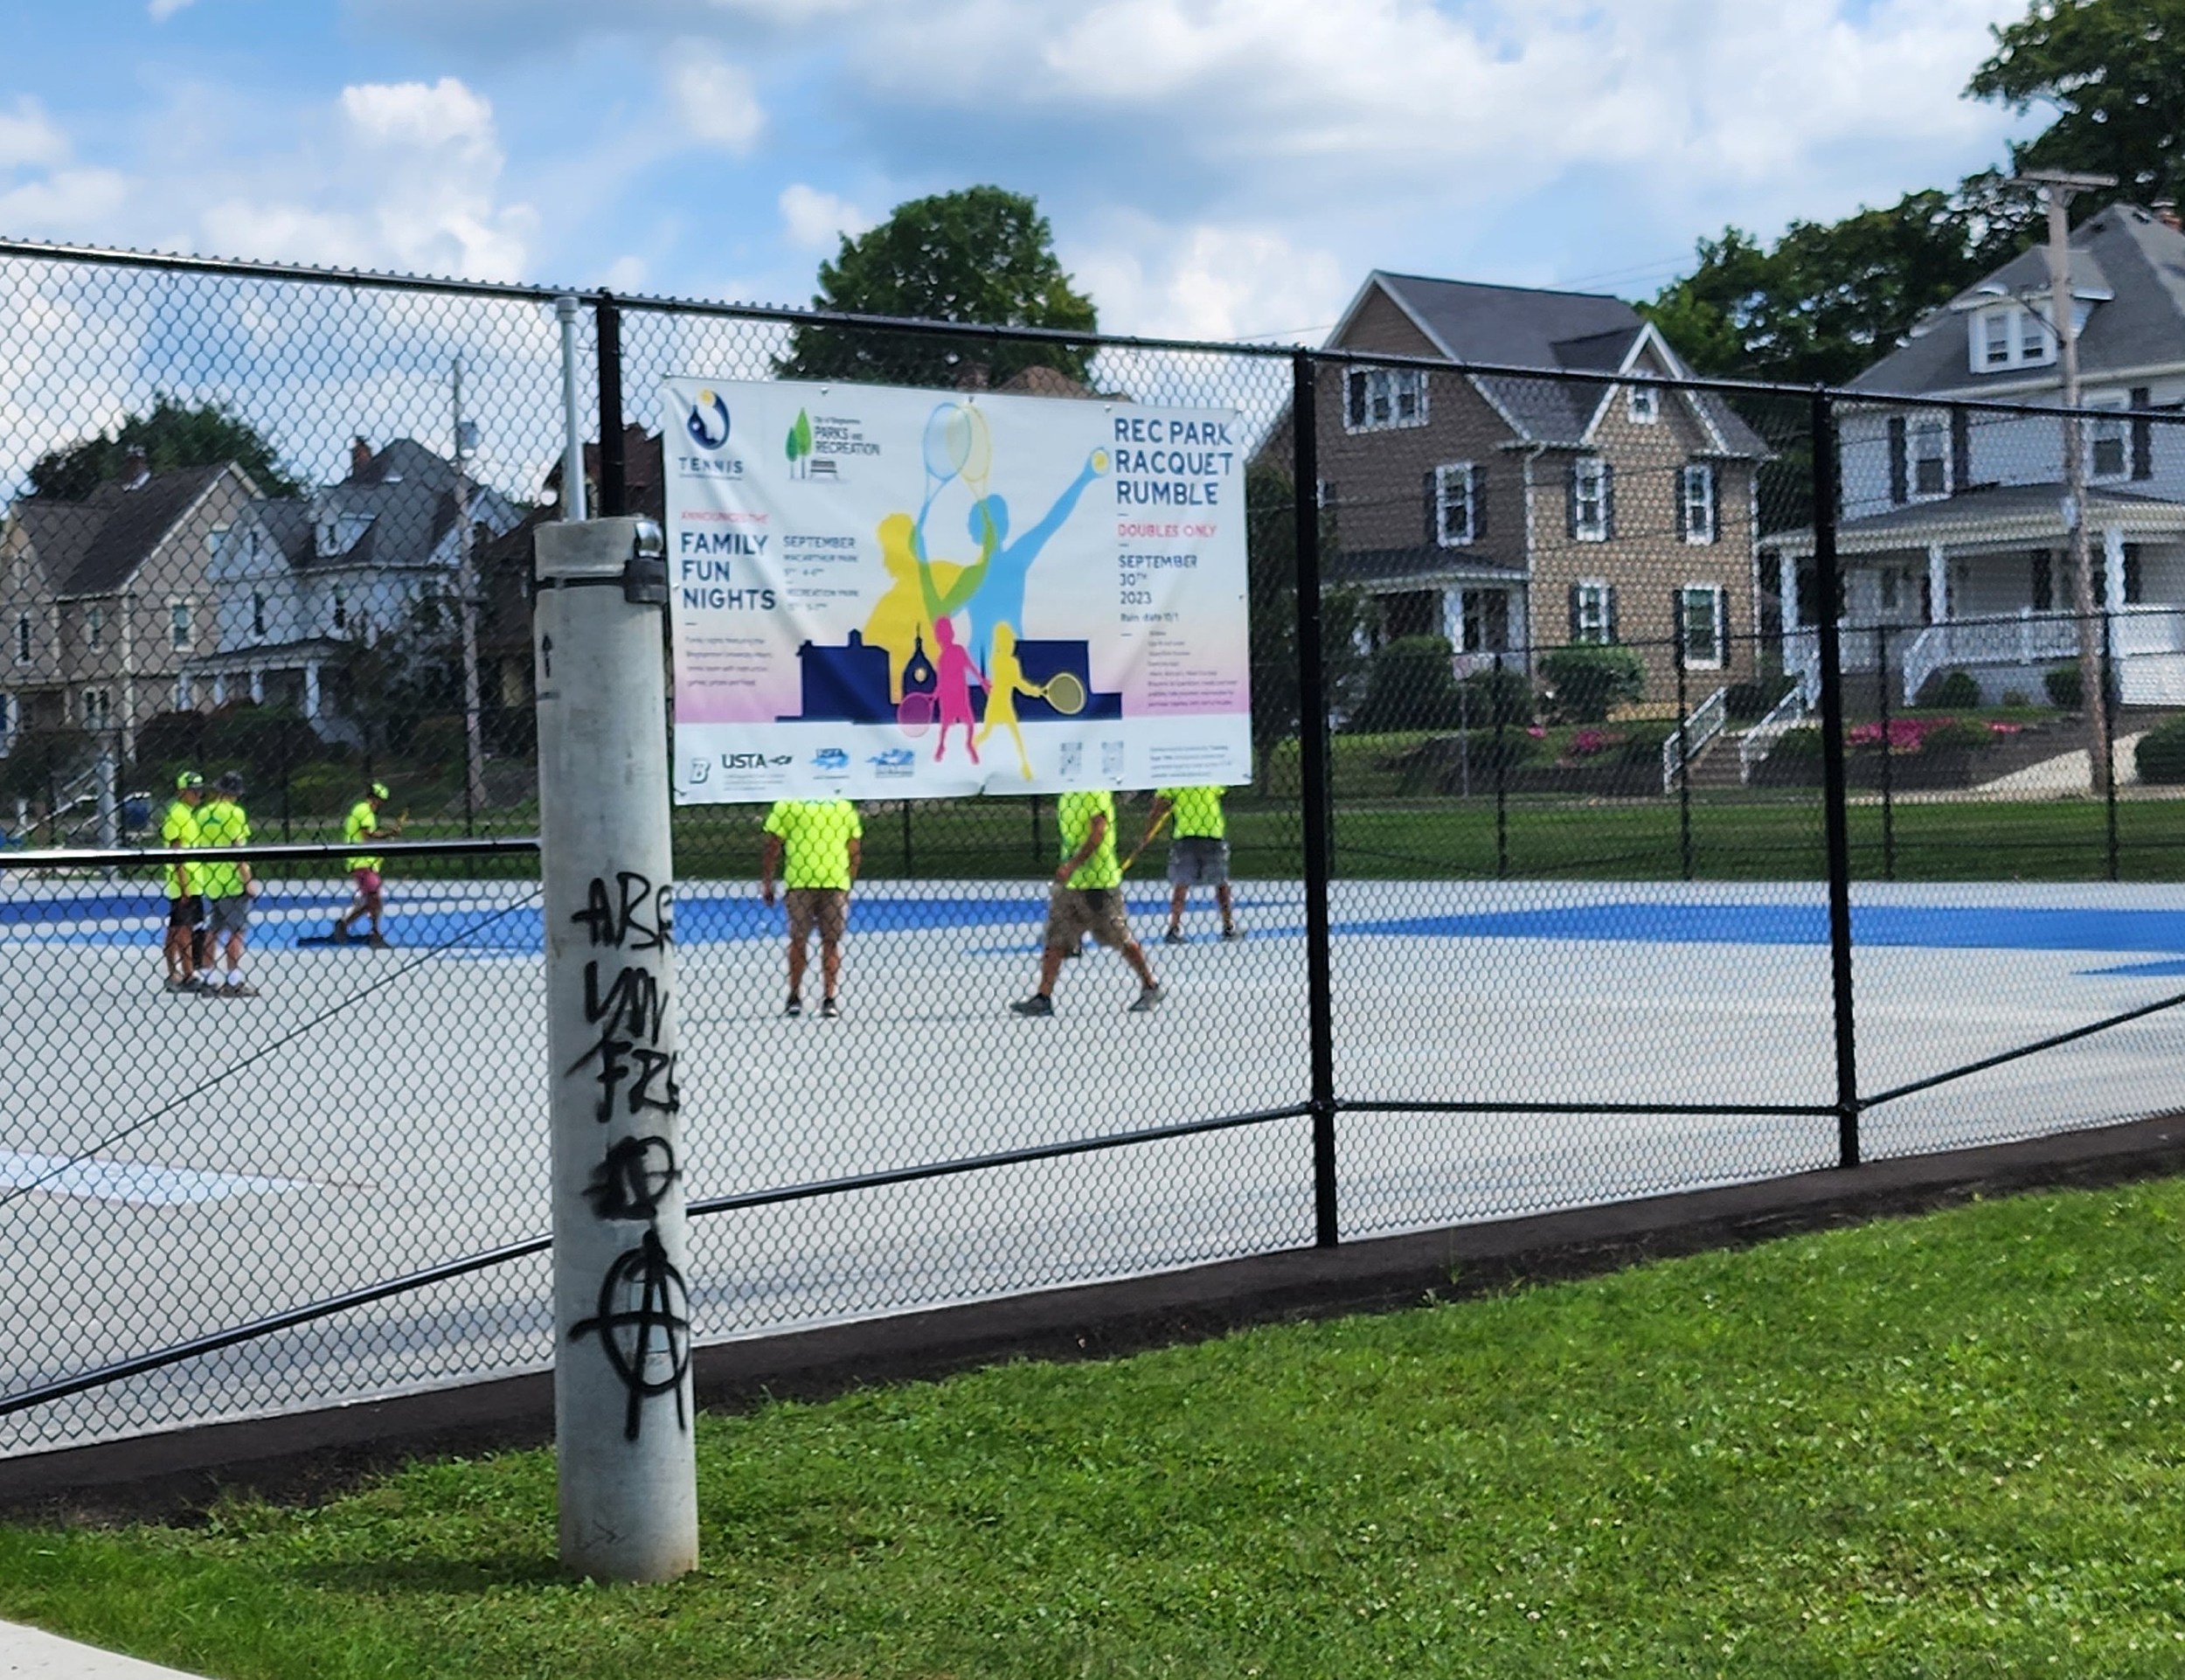 Rec Park Tennis Courts May Finally Open for Play This Month photo